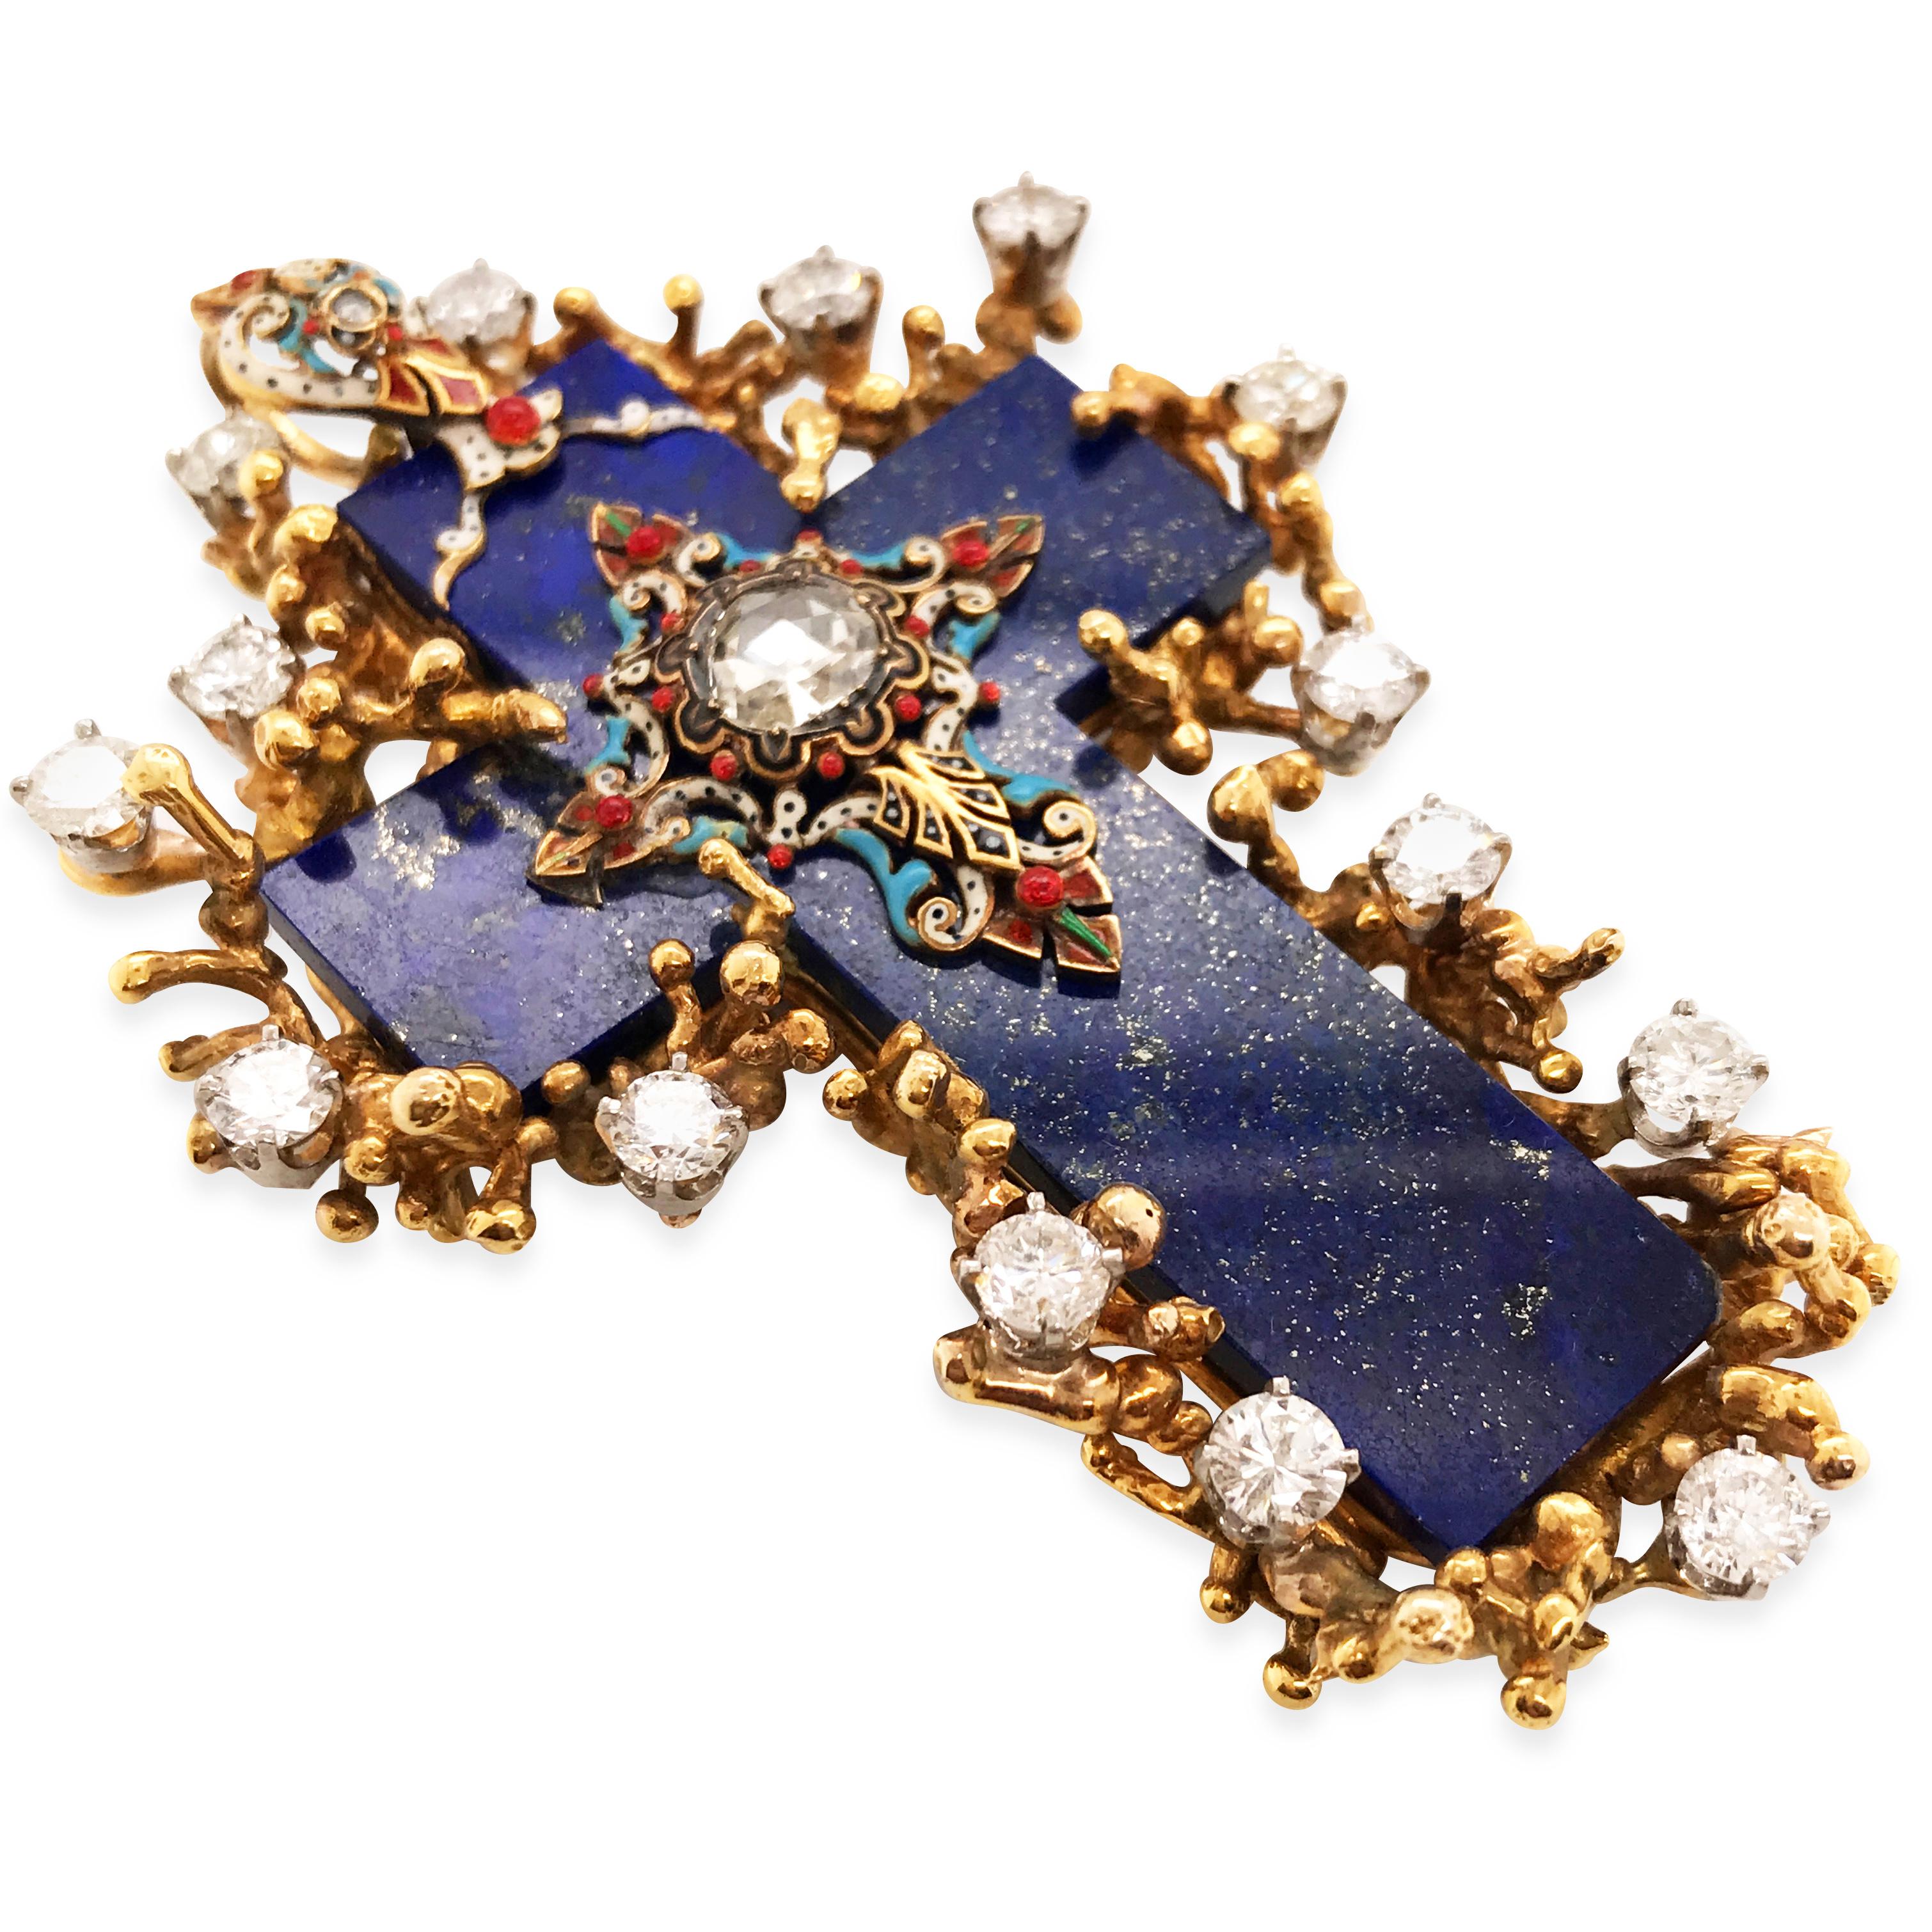 This exquisite Estate Lapis Lazuli cross uses a cross-shaped Lapis Lazuli as a base, centered with a 1.5-carat rose-cut diamond, set within an enamel decorated small cross patter. The enamel decorations are very colorful and lively, including red,